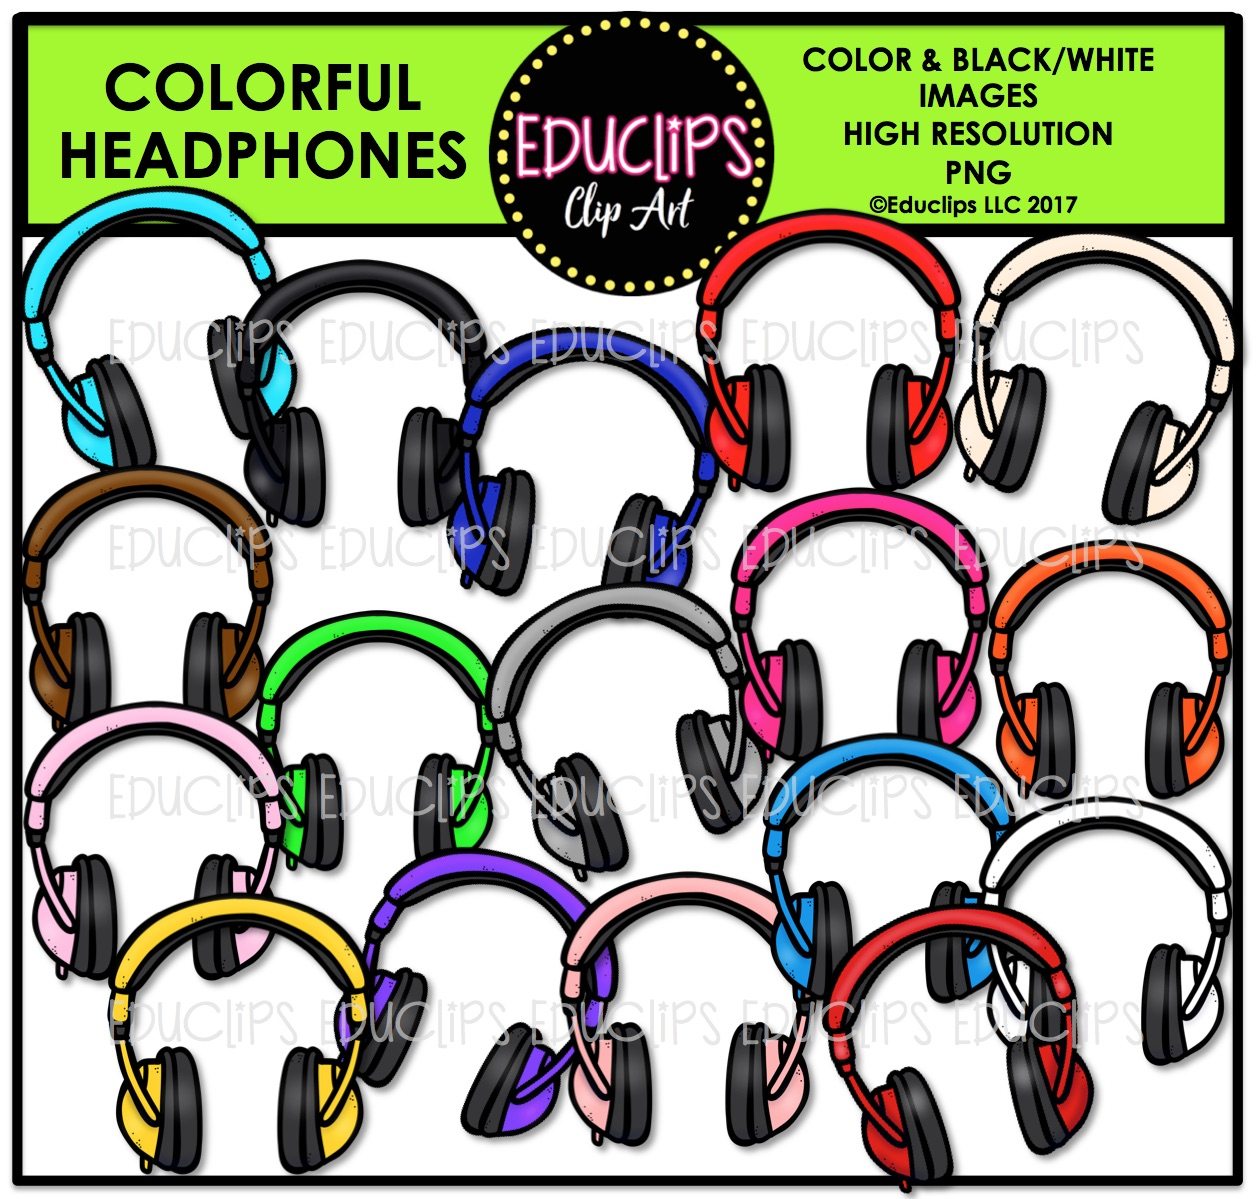 headphone clipart colorful